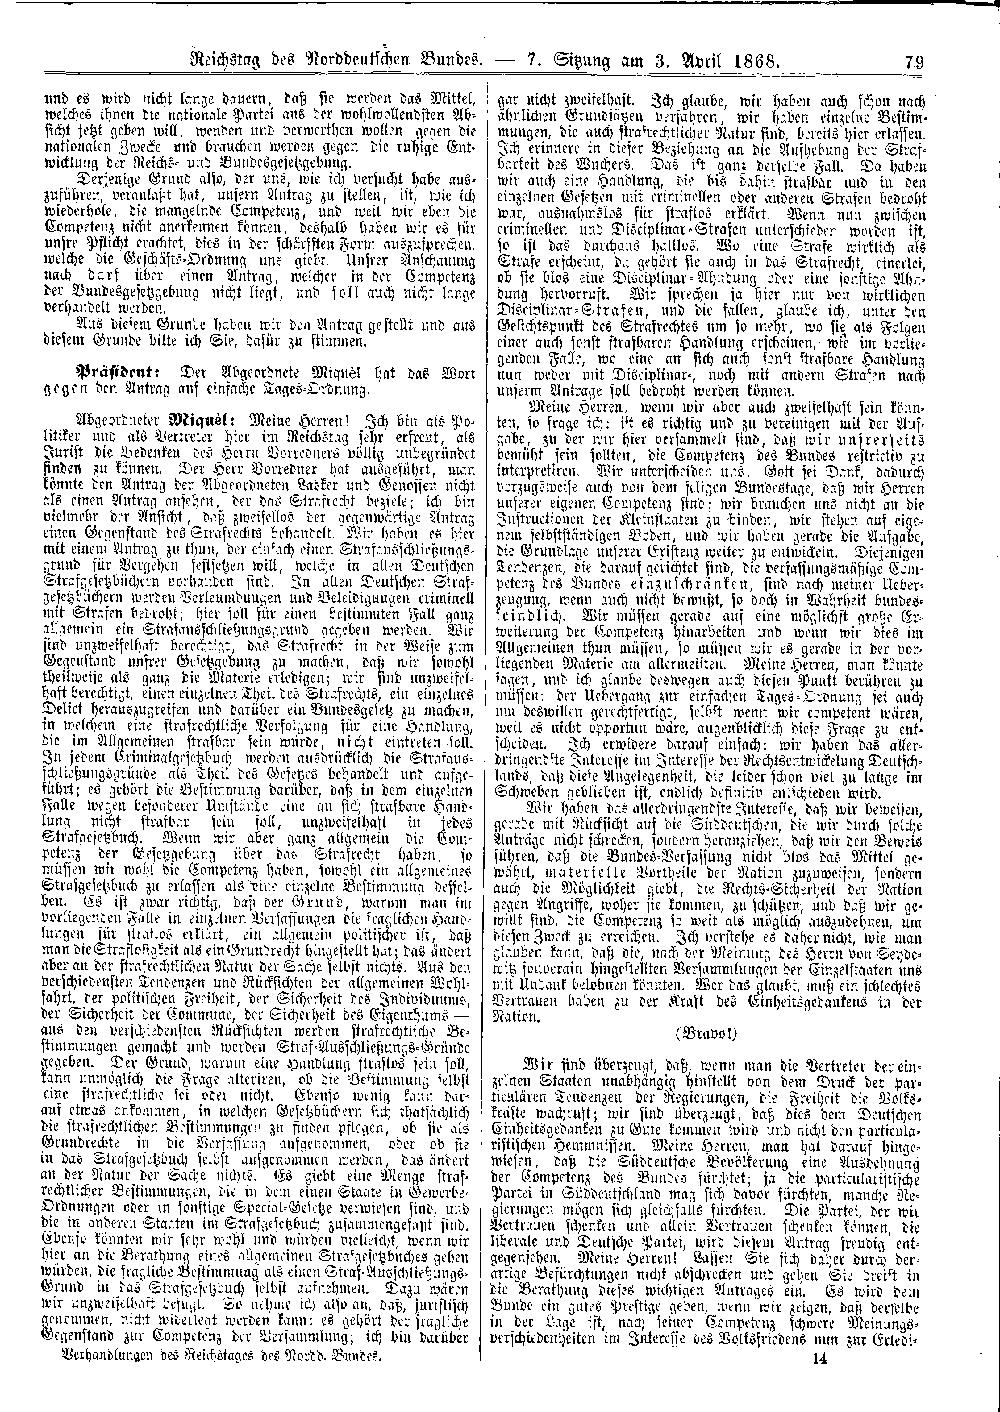 Scan of page 79